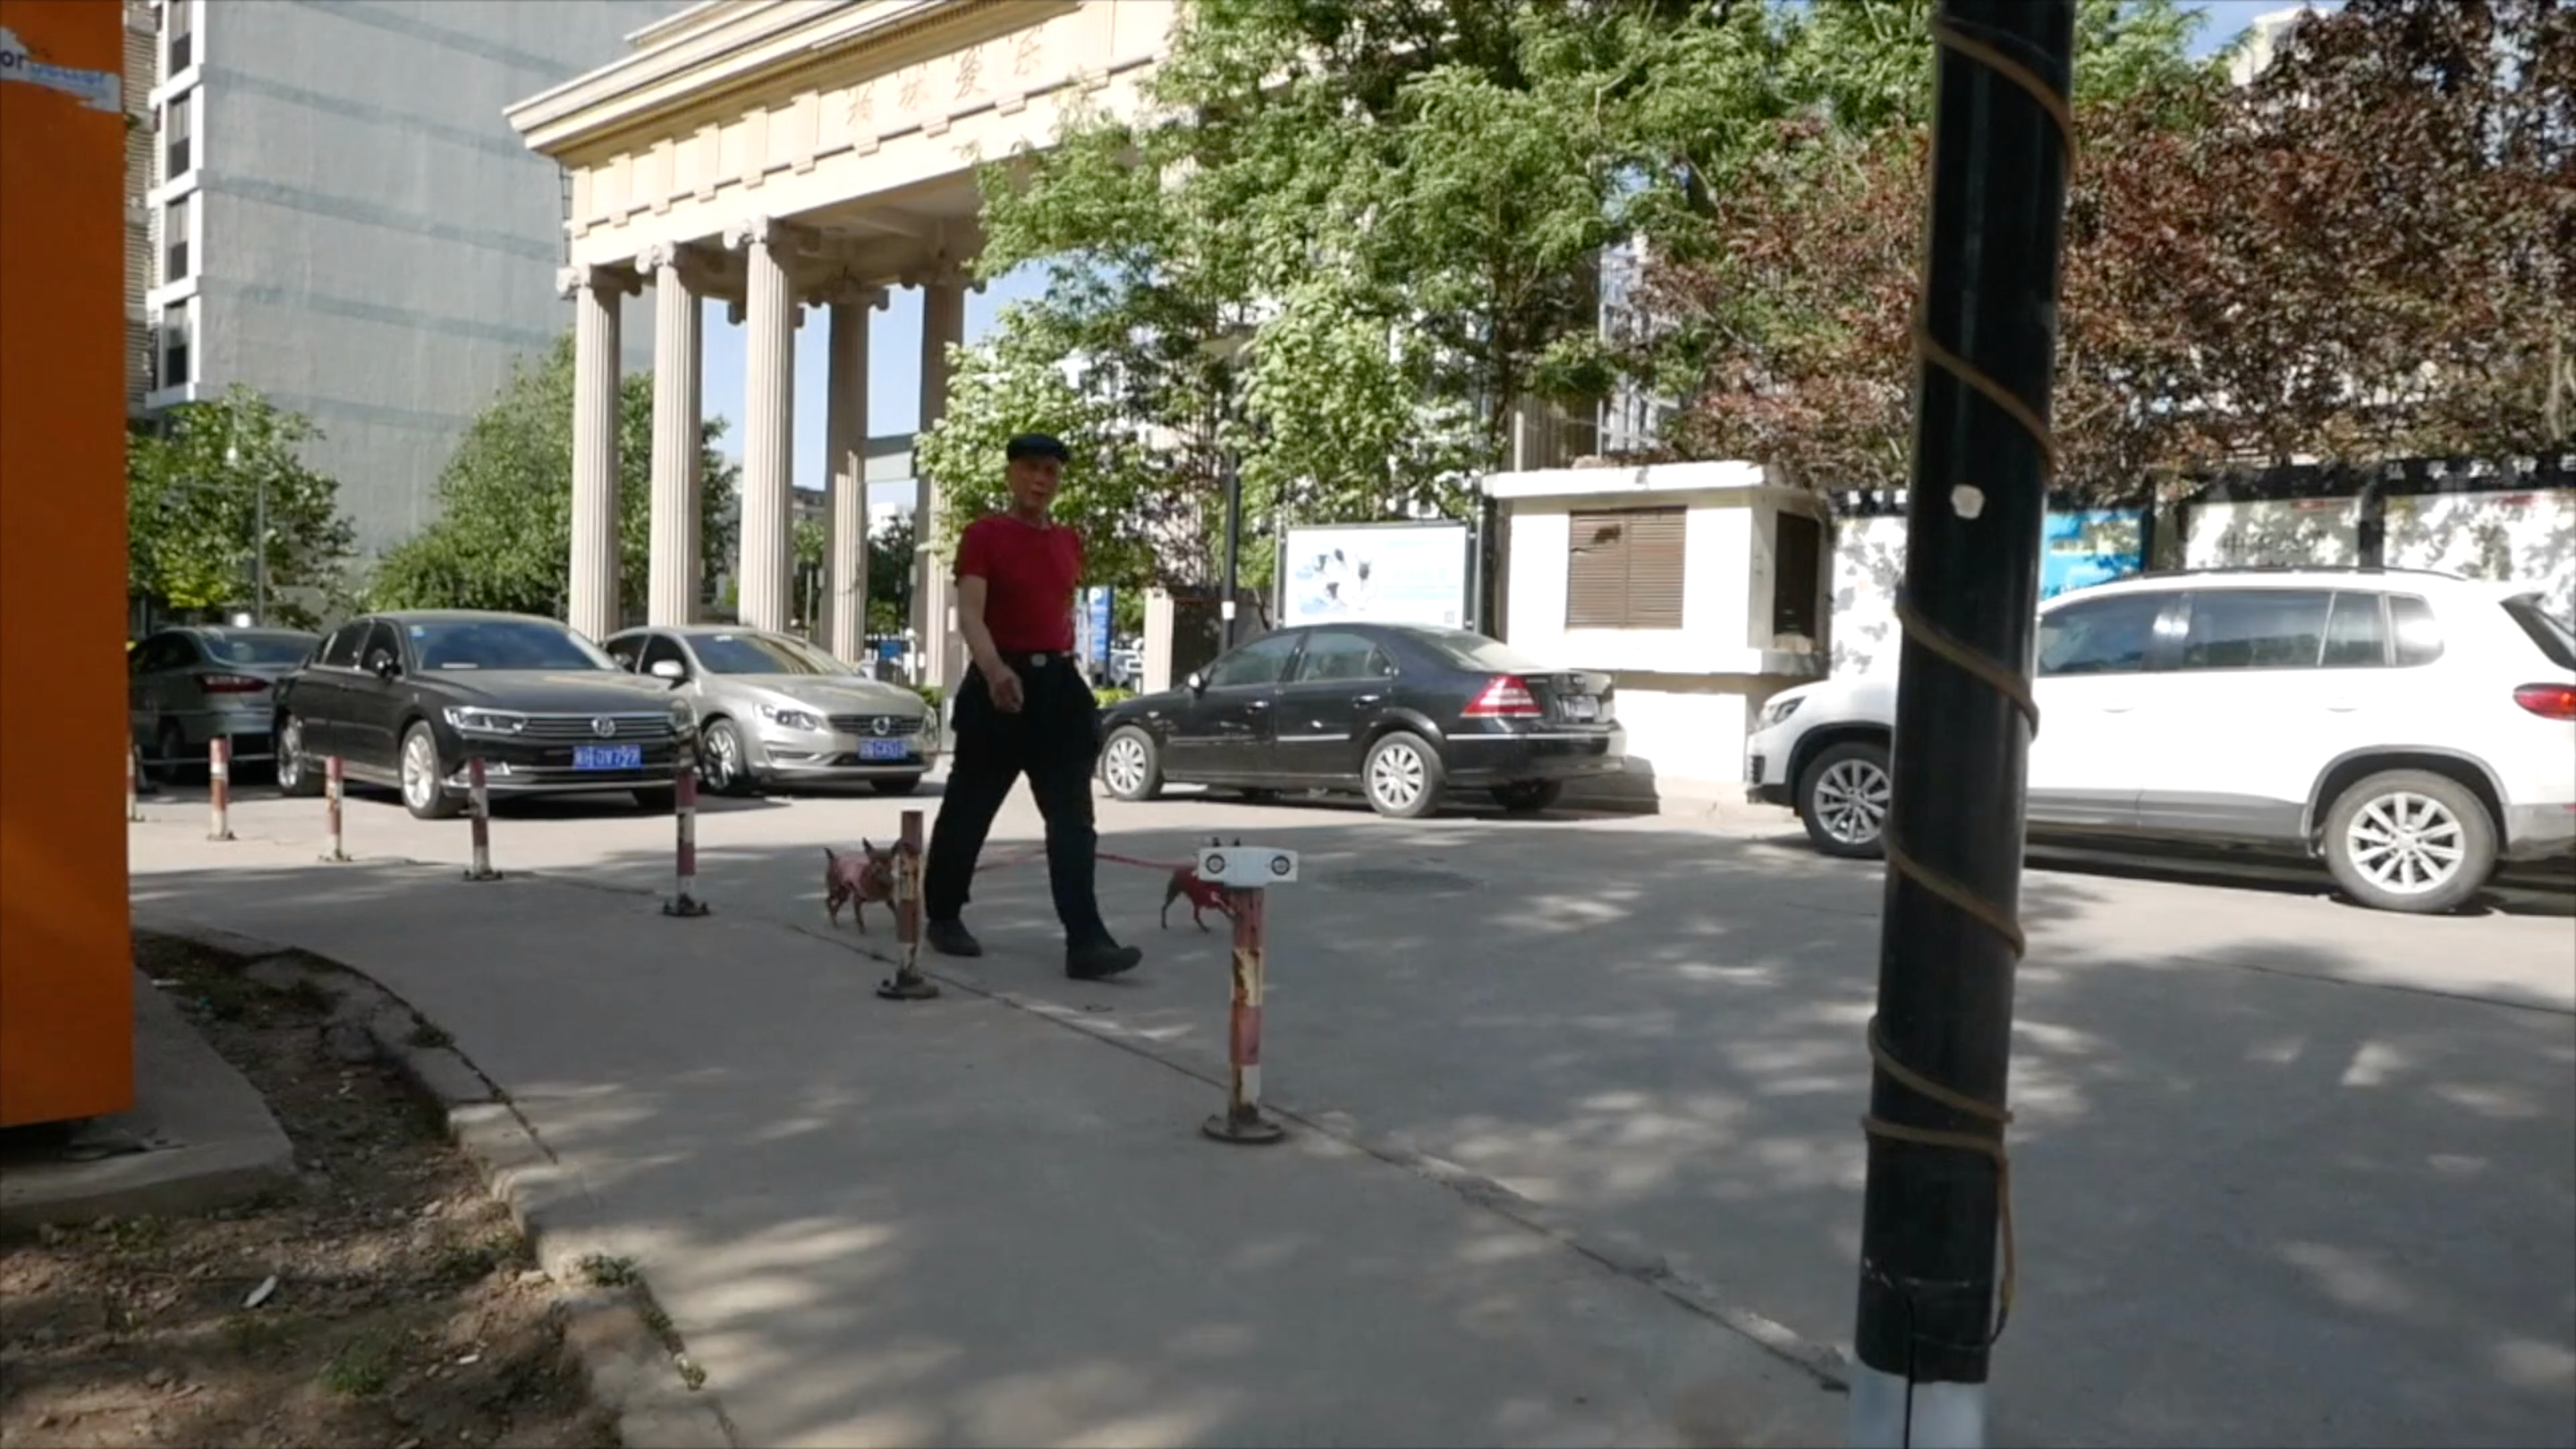 A man walks on the street with two dogs